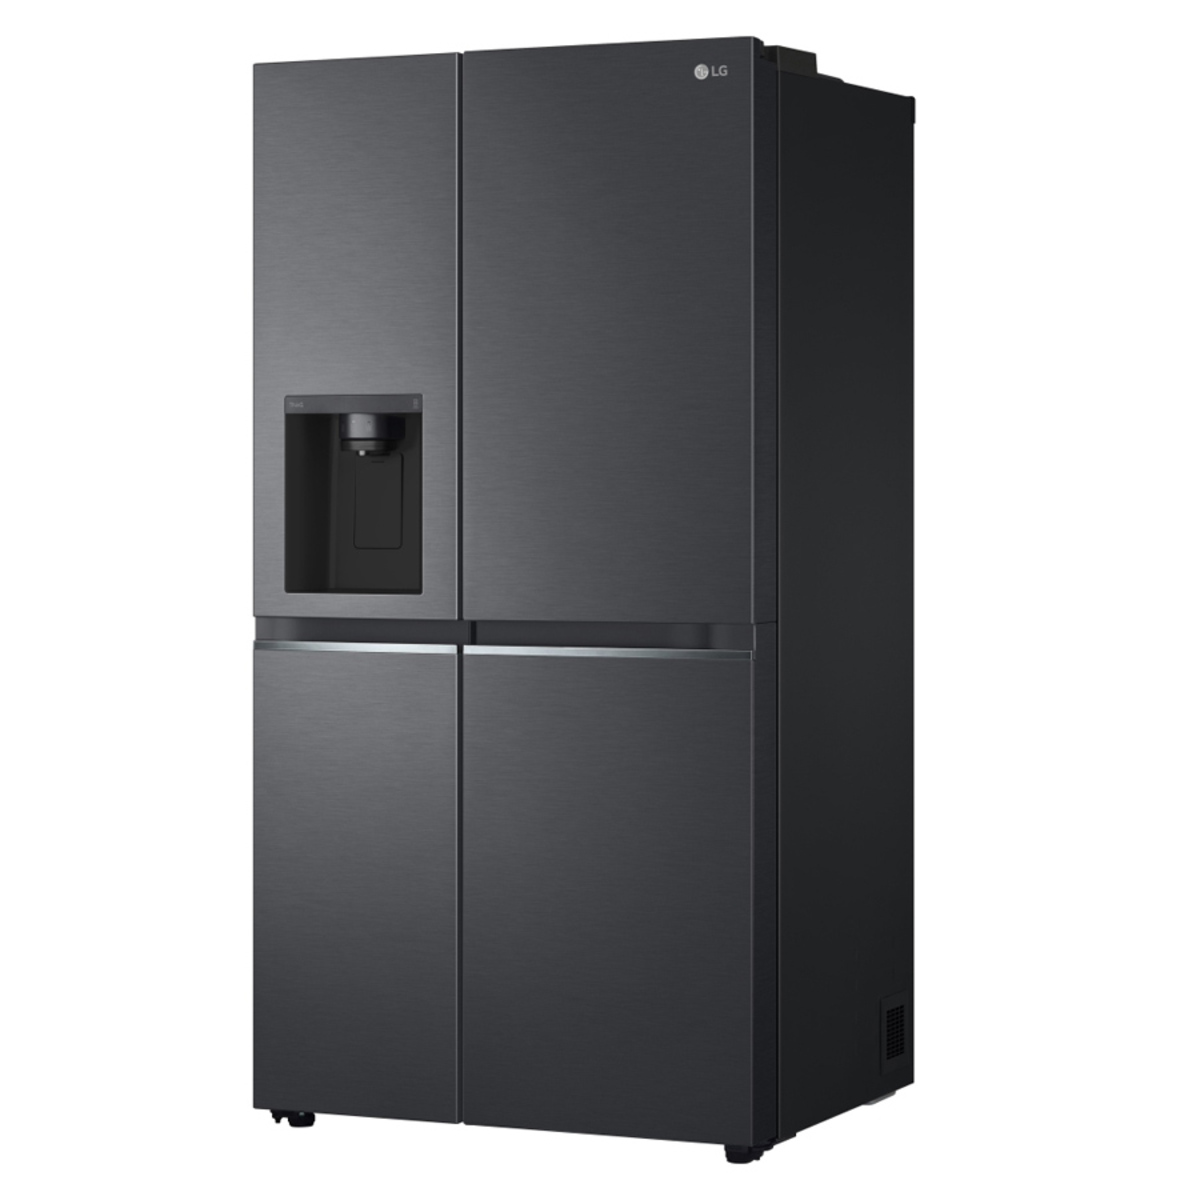 LG GSLV71MCTD D Rated 635L American Style Fridge Freezer, Non Plumbed